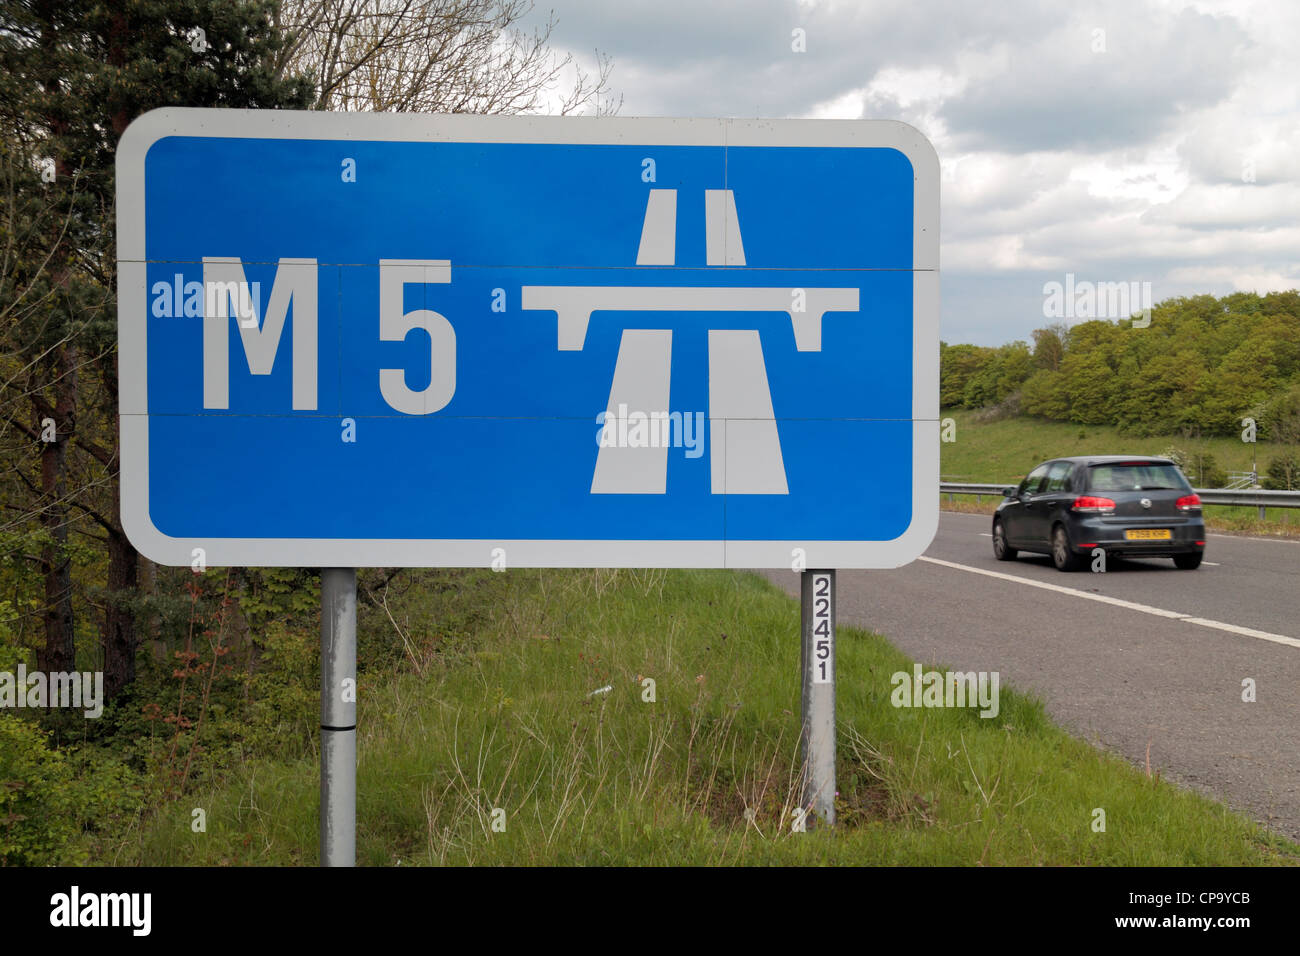 M5 motorway sign on slip road leading to the the M5 motorway in South Gloucestershire, UK. Stock Photo